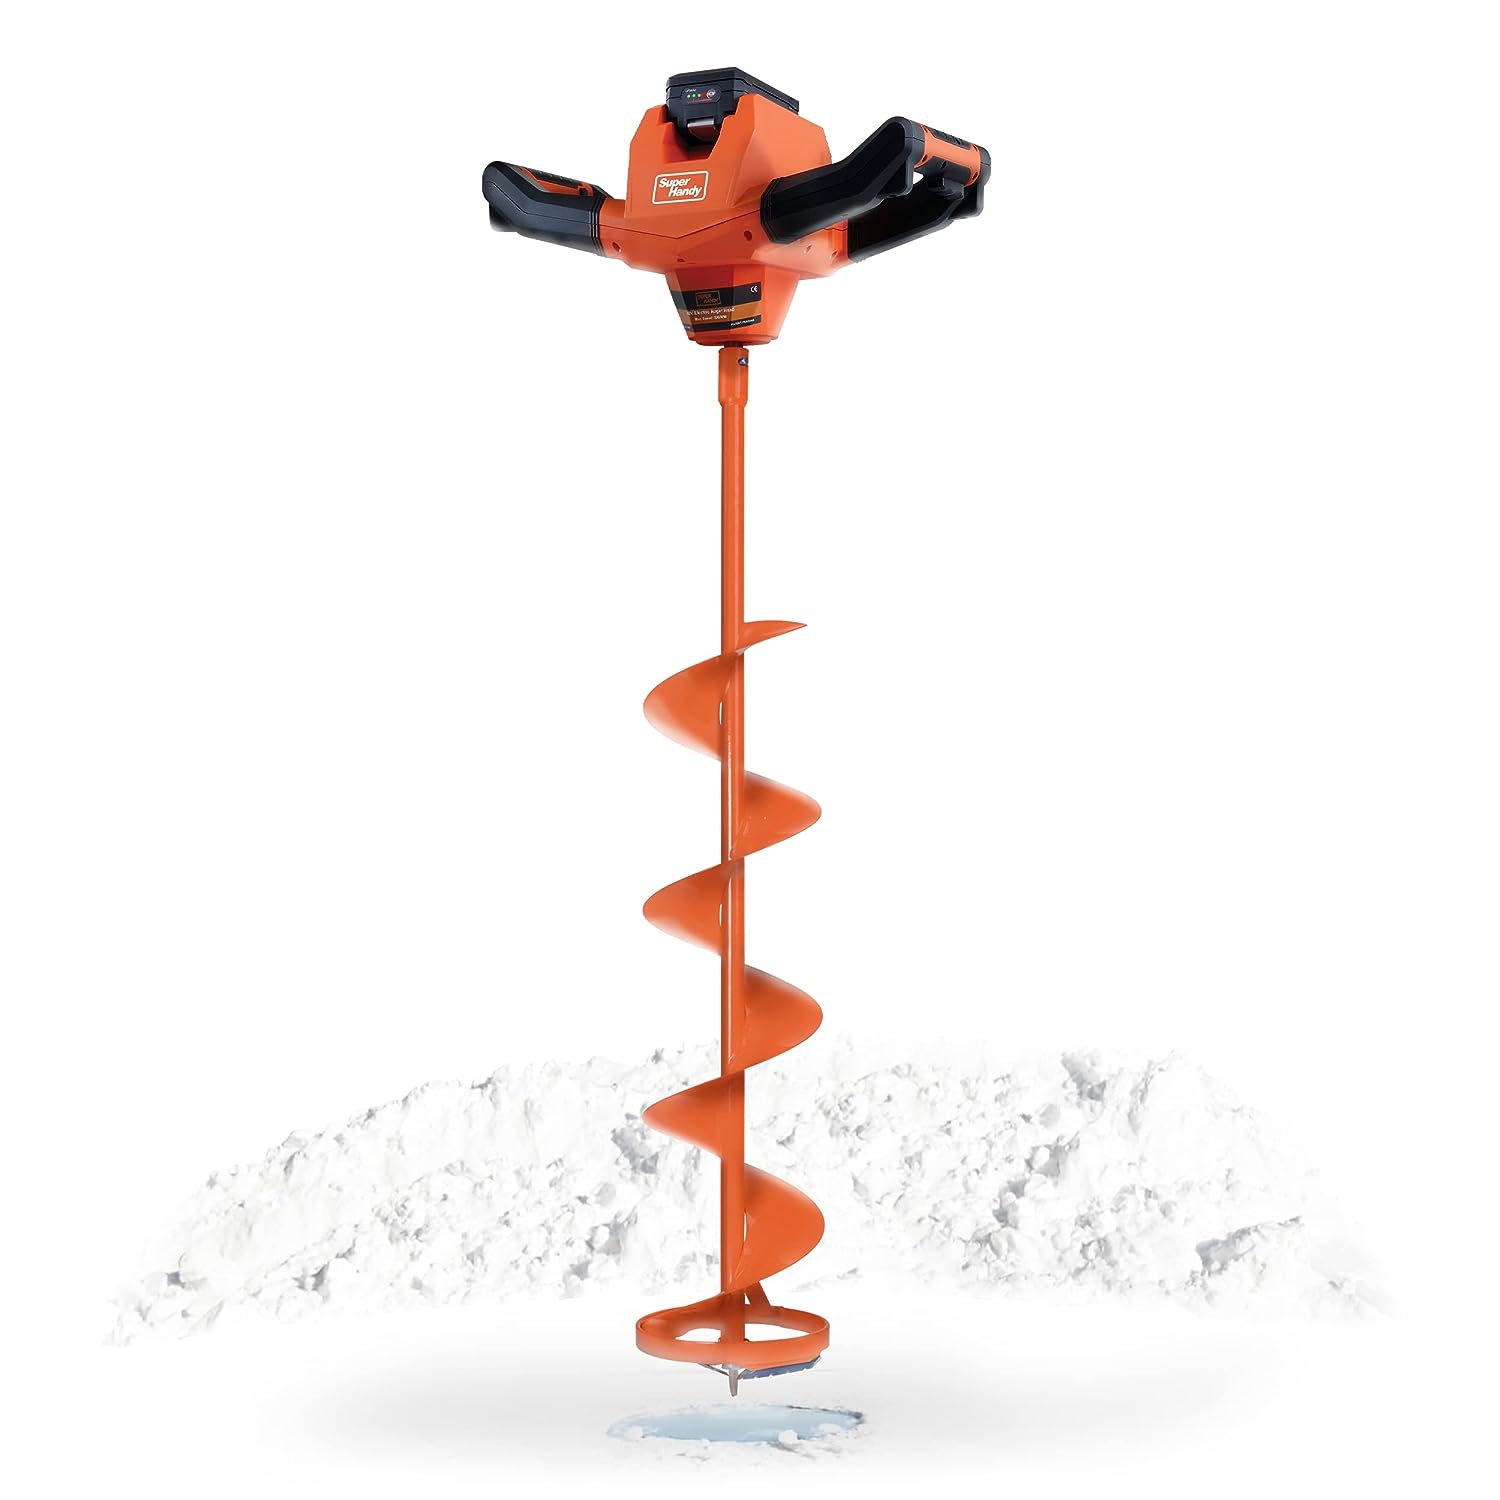 SuperHandy Ice Auger Eco-Friendly Electric Cordless Auger Power Head with Steel 20.3 cm x 99 cm, Lithium Ion Battery & Charger for Ice Burrowing, Drilling & Ice Fishing